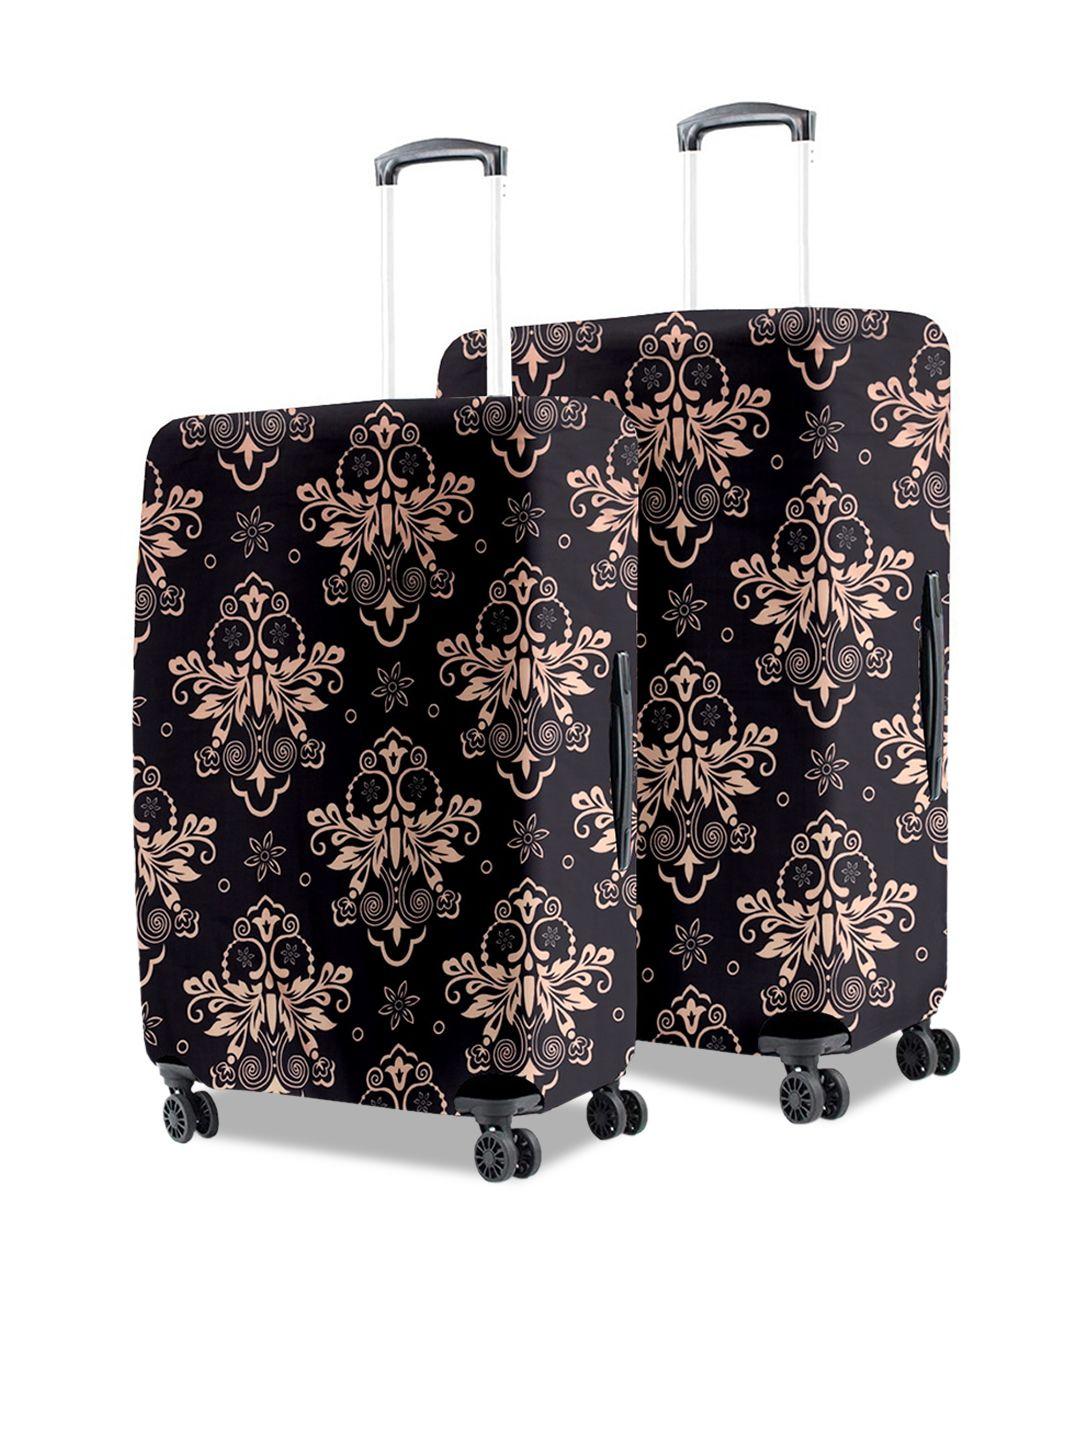 cortina set of 2 black & peach-coloured printed trolley trolley bag cover